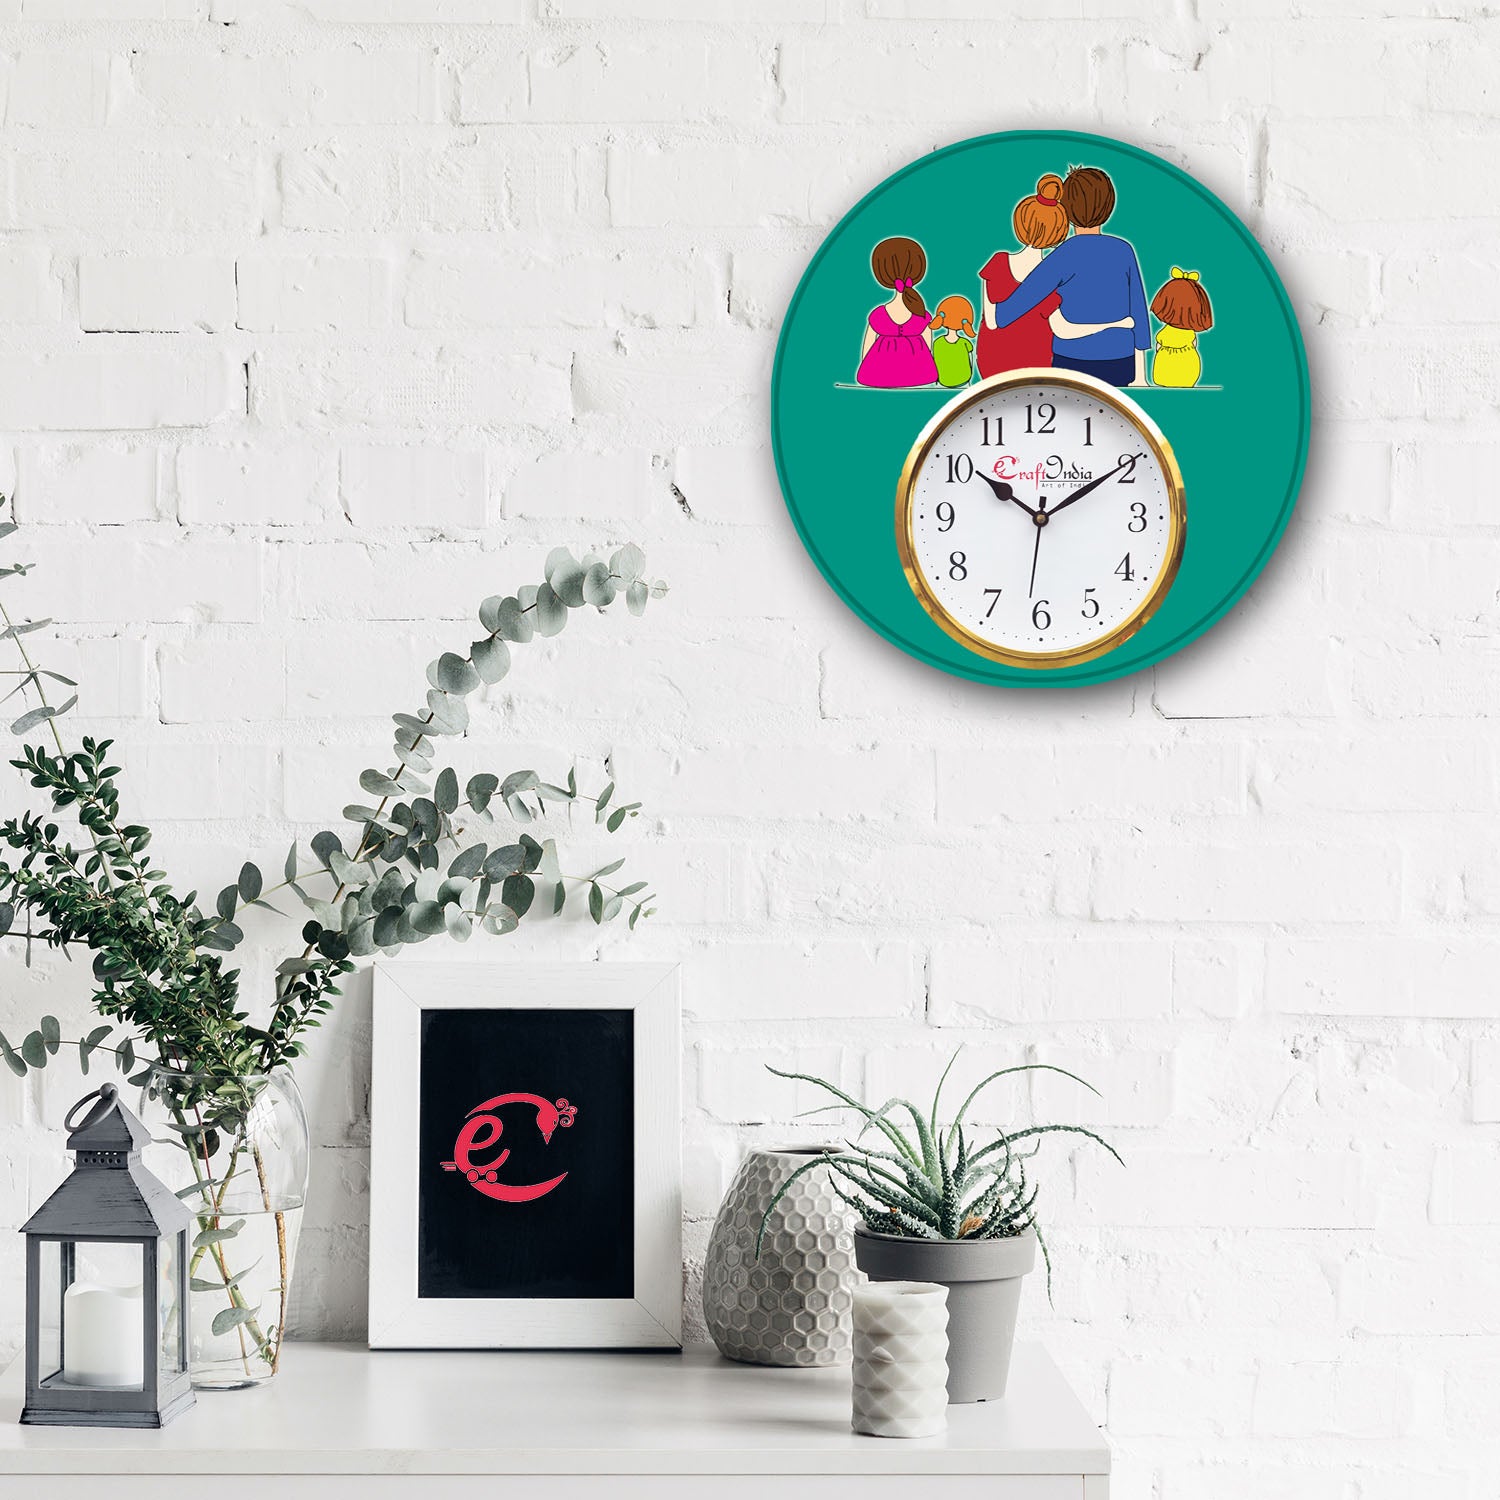 Family Theme Wooden Colorful Round Wall Clock 1